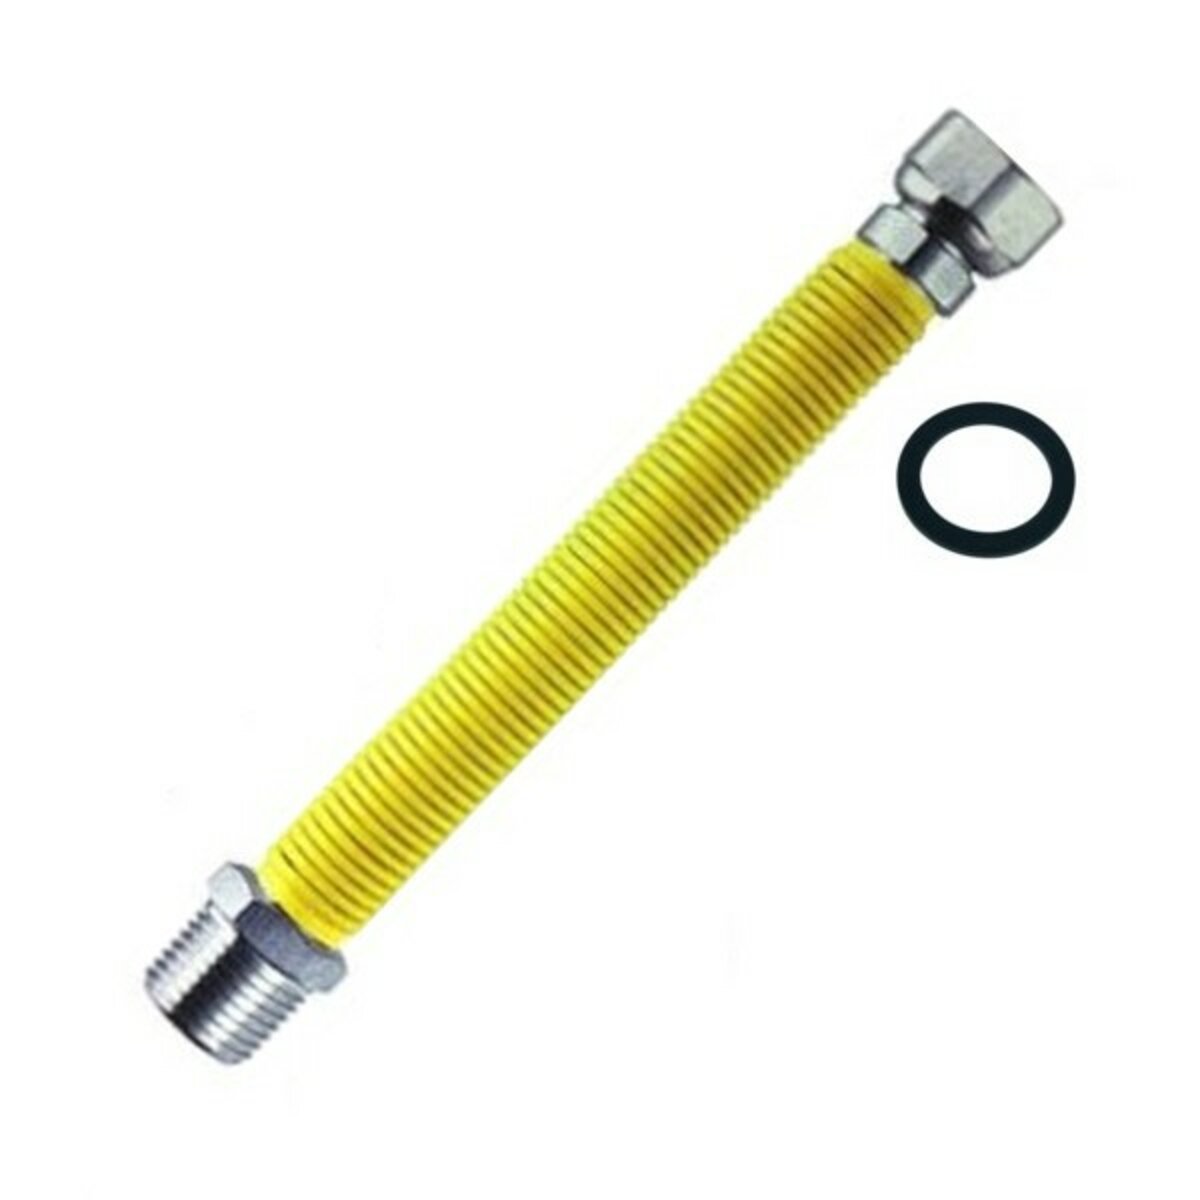 Expandable hose 1/2" x 1/2" m/f yellow coated steel for gas